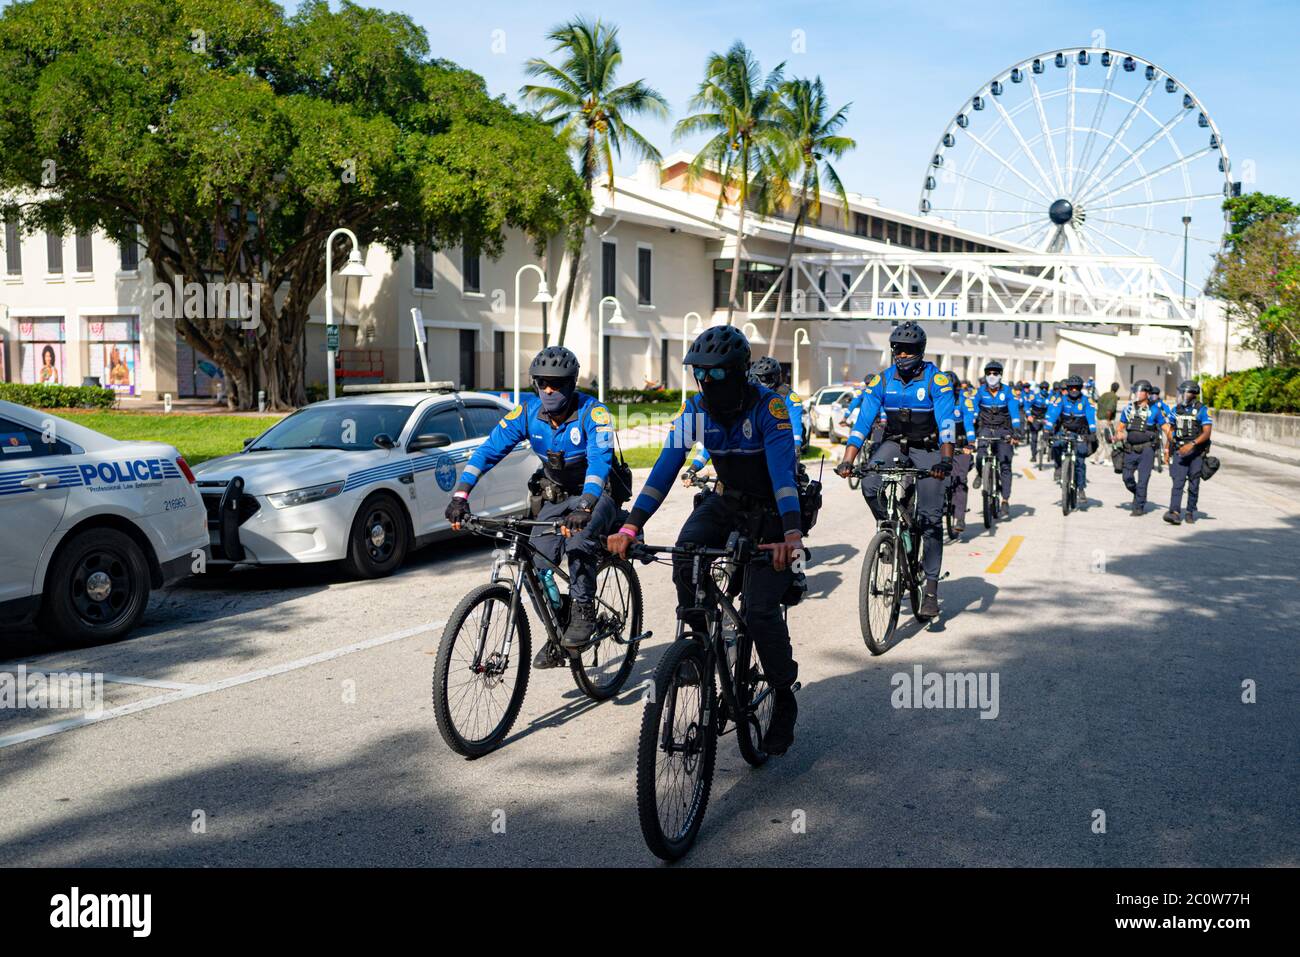 Miami Downtown, FL, USA - MAY 31, 2020: Police Bicycle Patrol in Miami. Protection for the city. Calm and safety Stock Photo